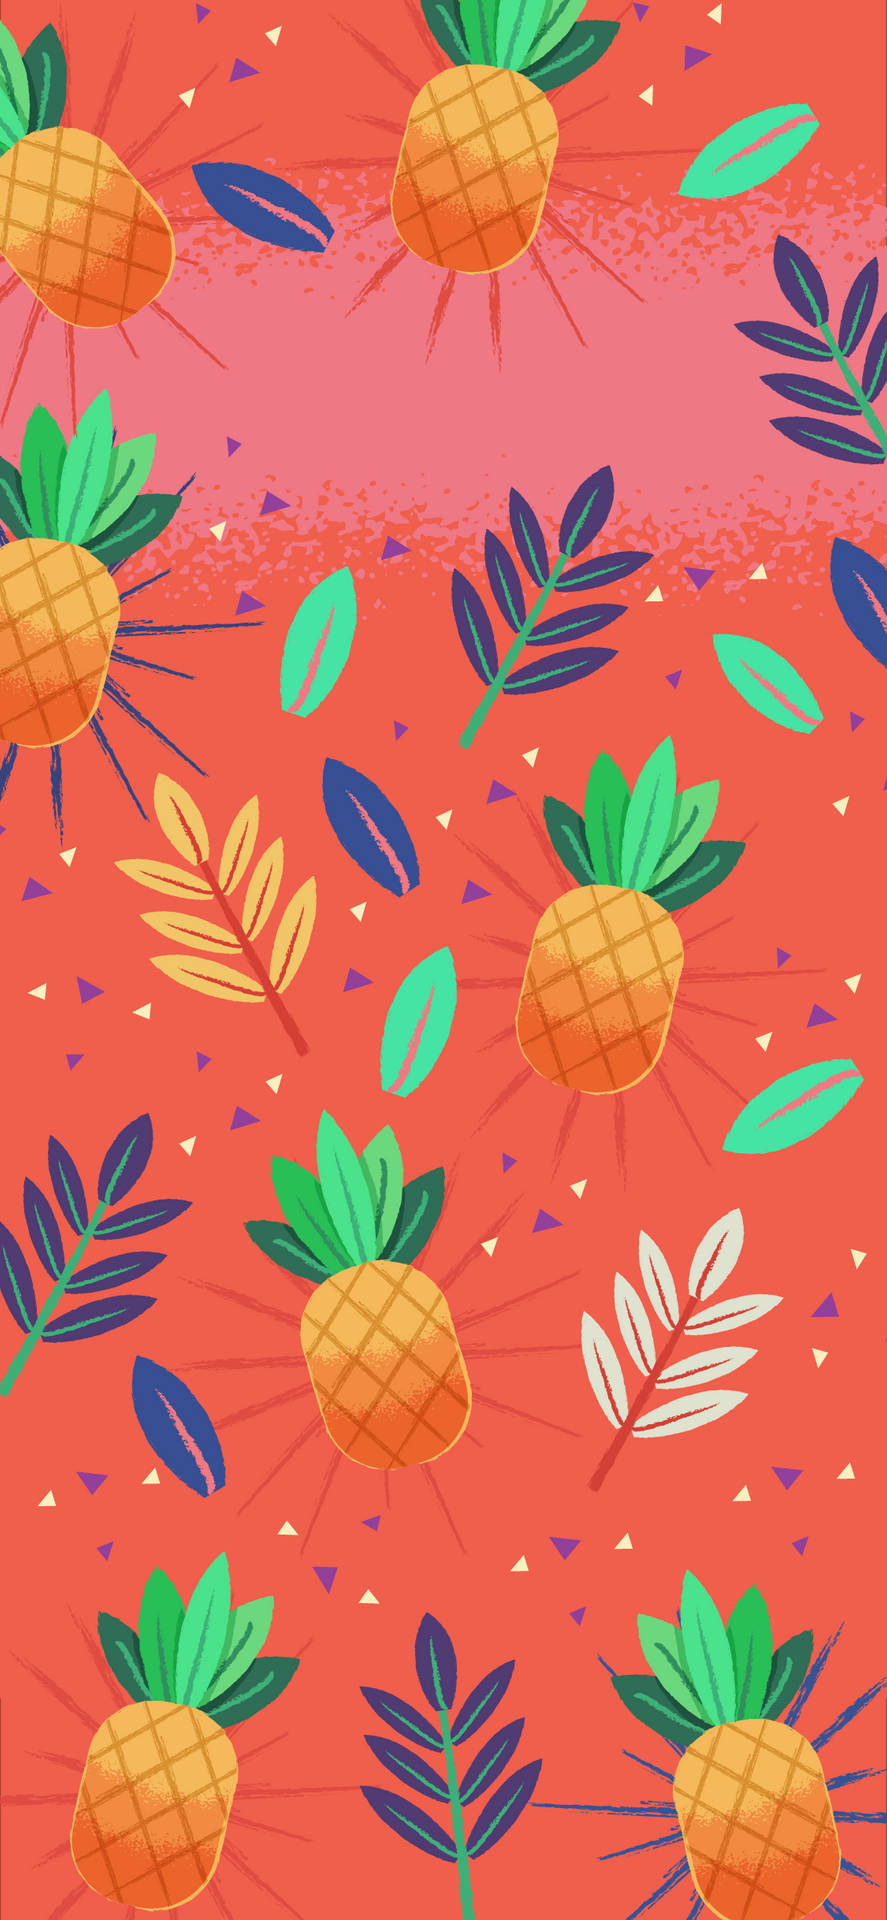 Pineapples And Leaves On A Red Background Wallpaper